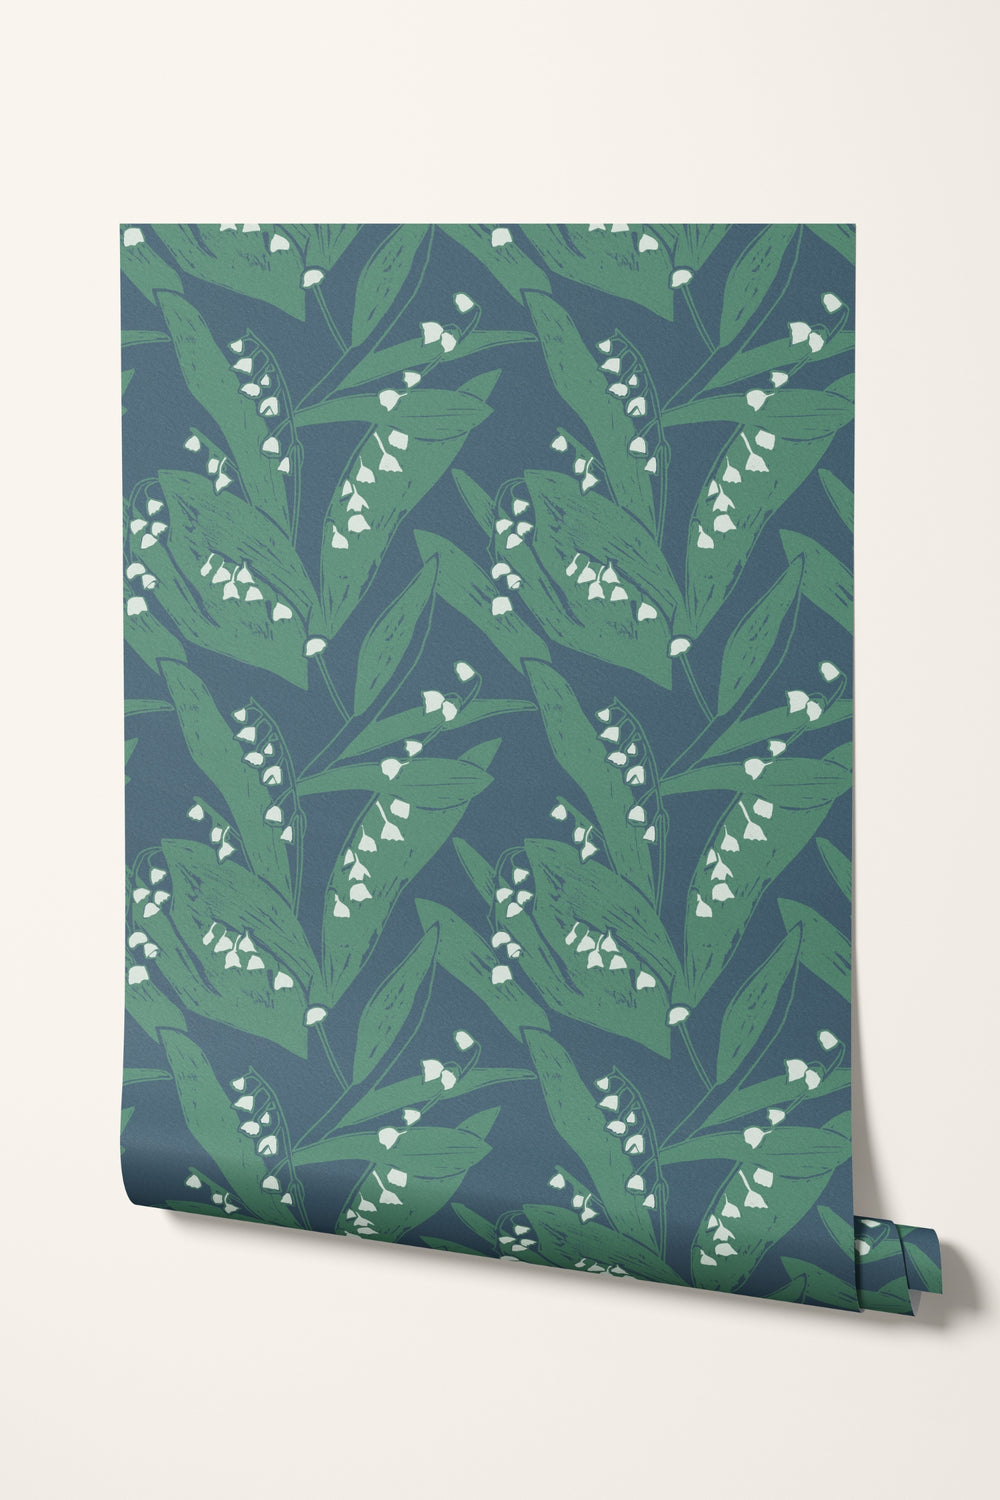 Lily of the Valley Wallpaper- Leaves at Midnight